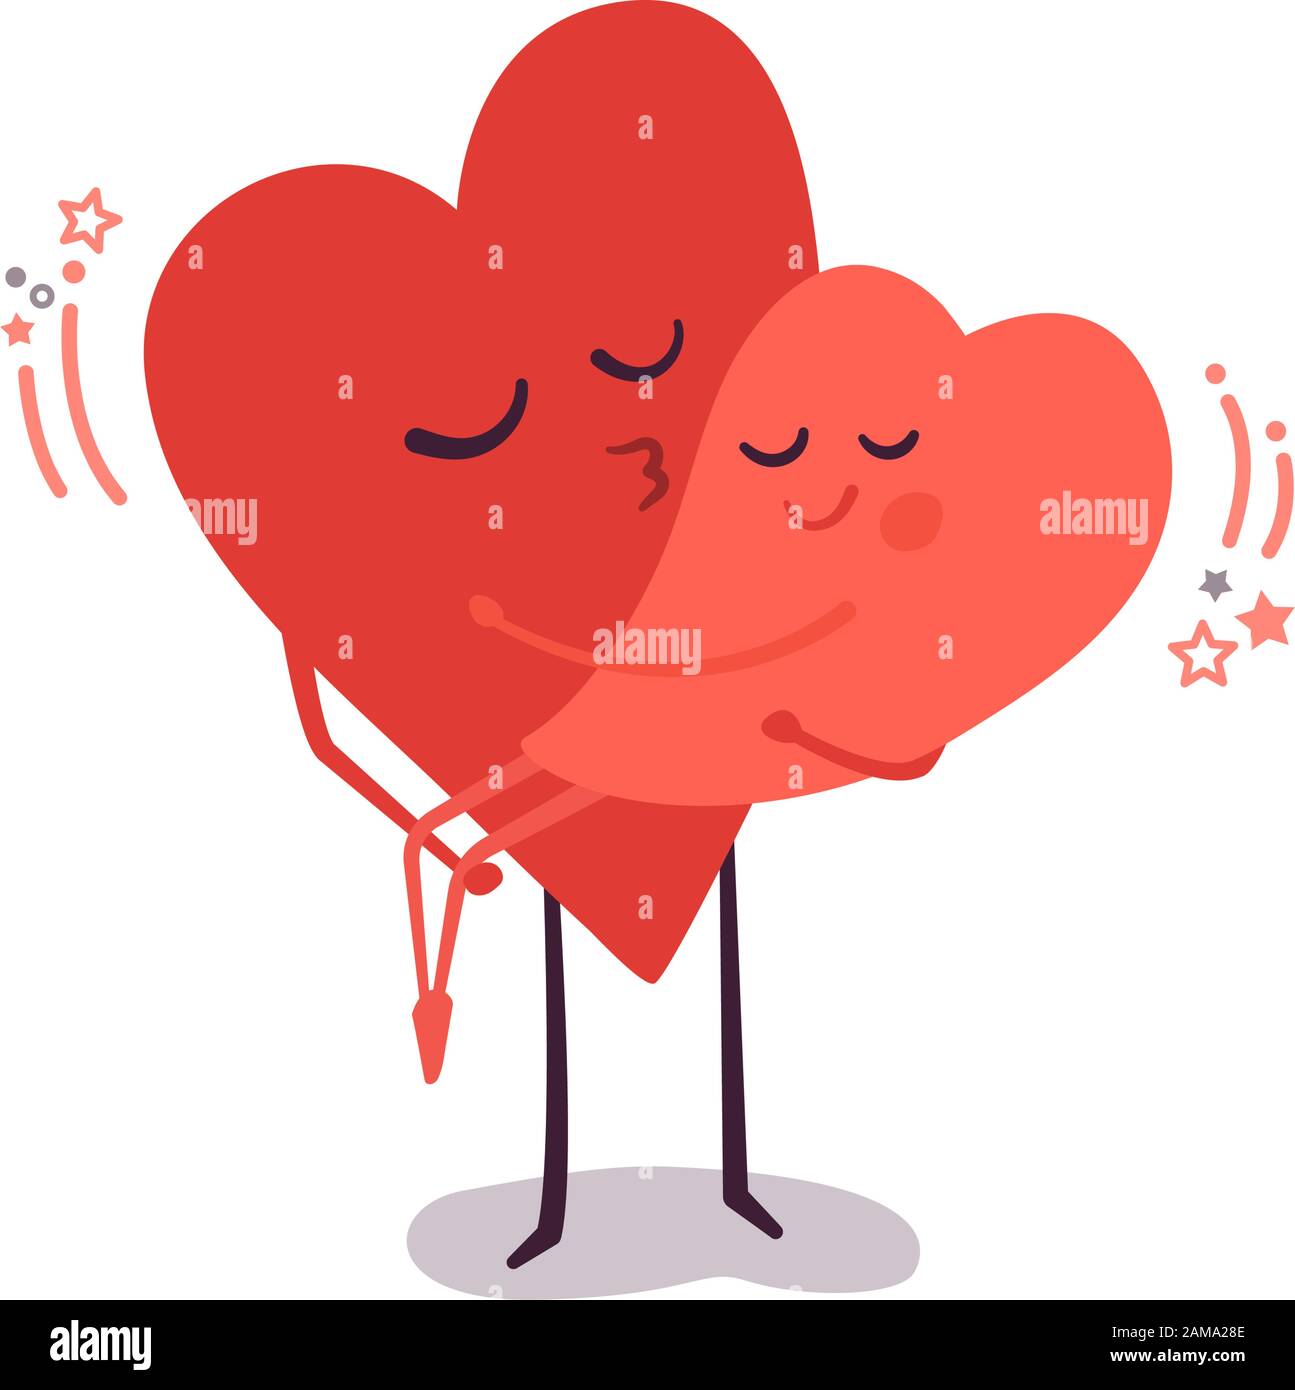 Two black cat head couple family icon red heart Vector Image